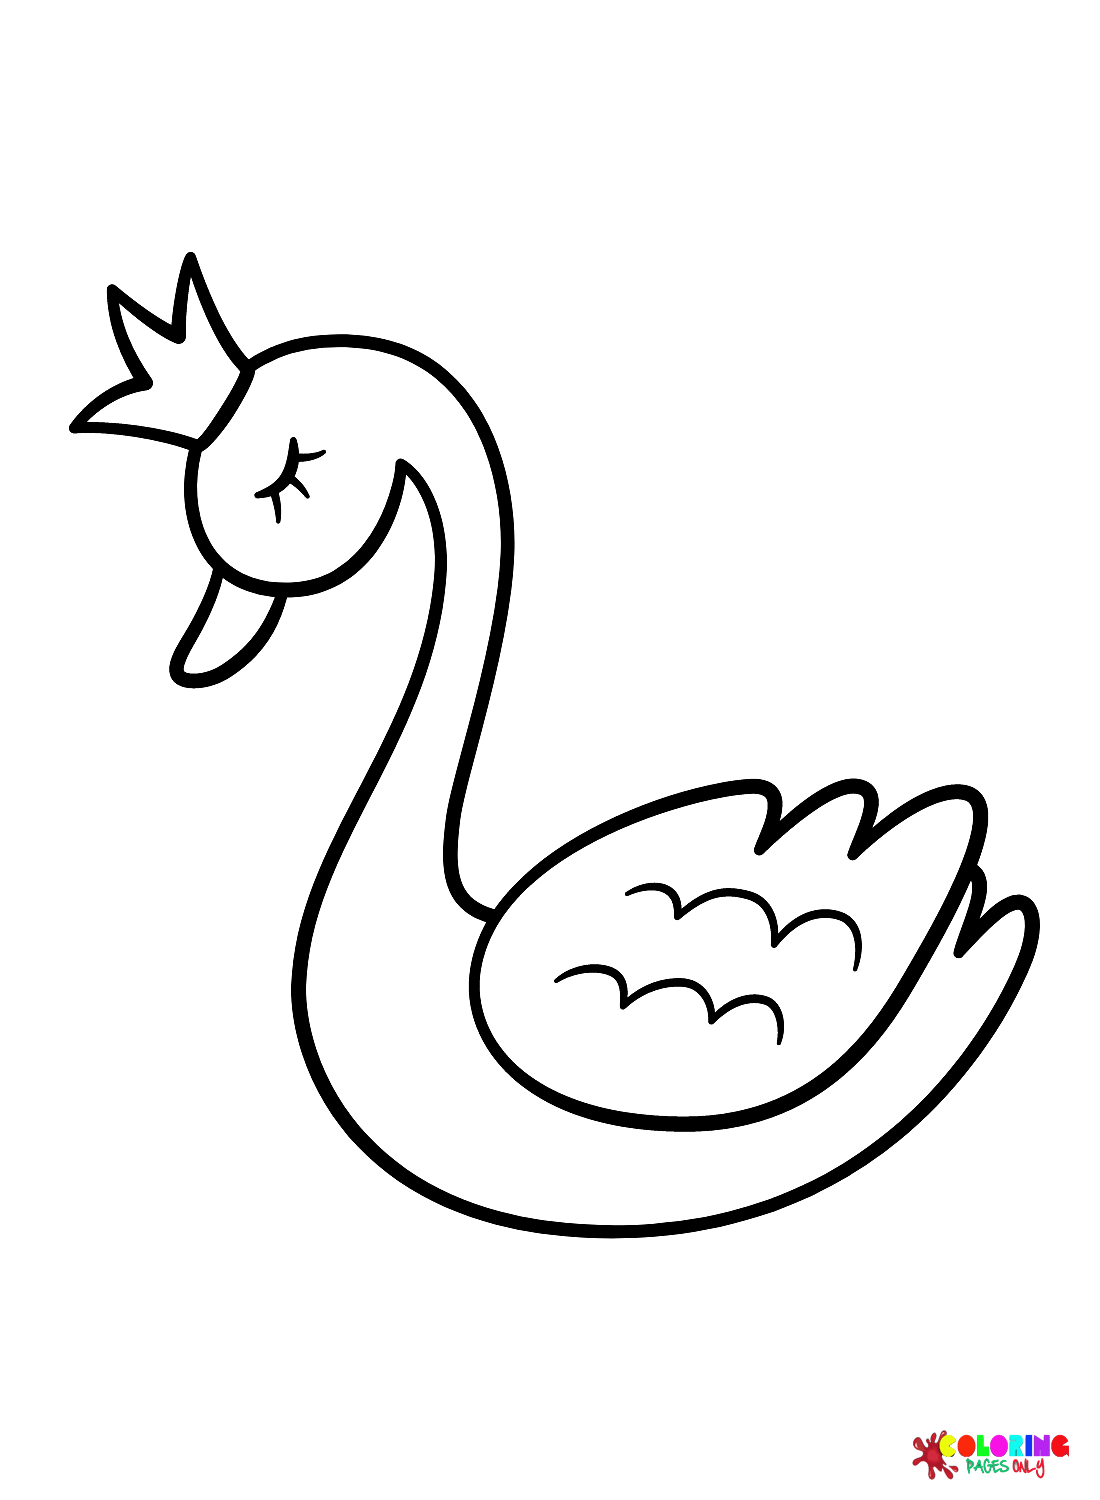 Cute Swan Coloring Page - Free Printable Coloring Pages